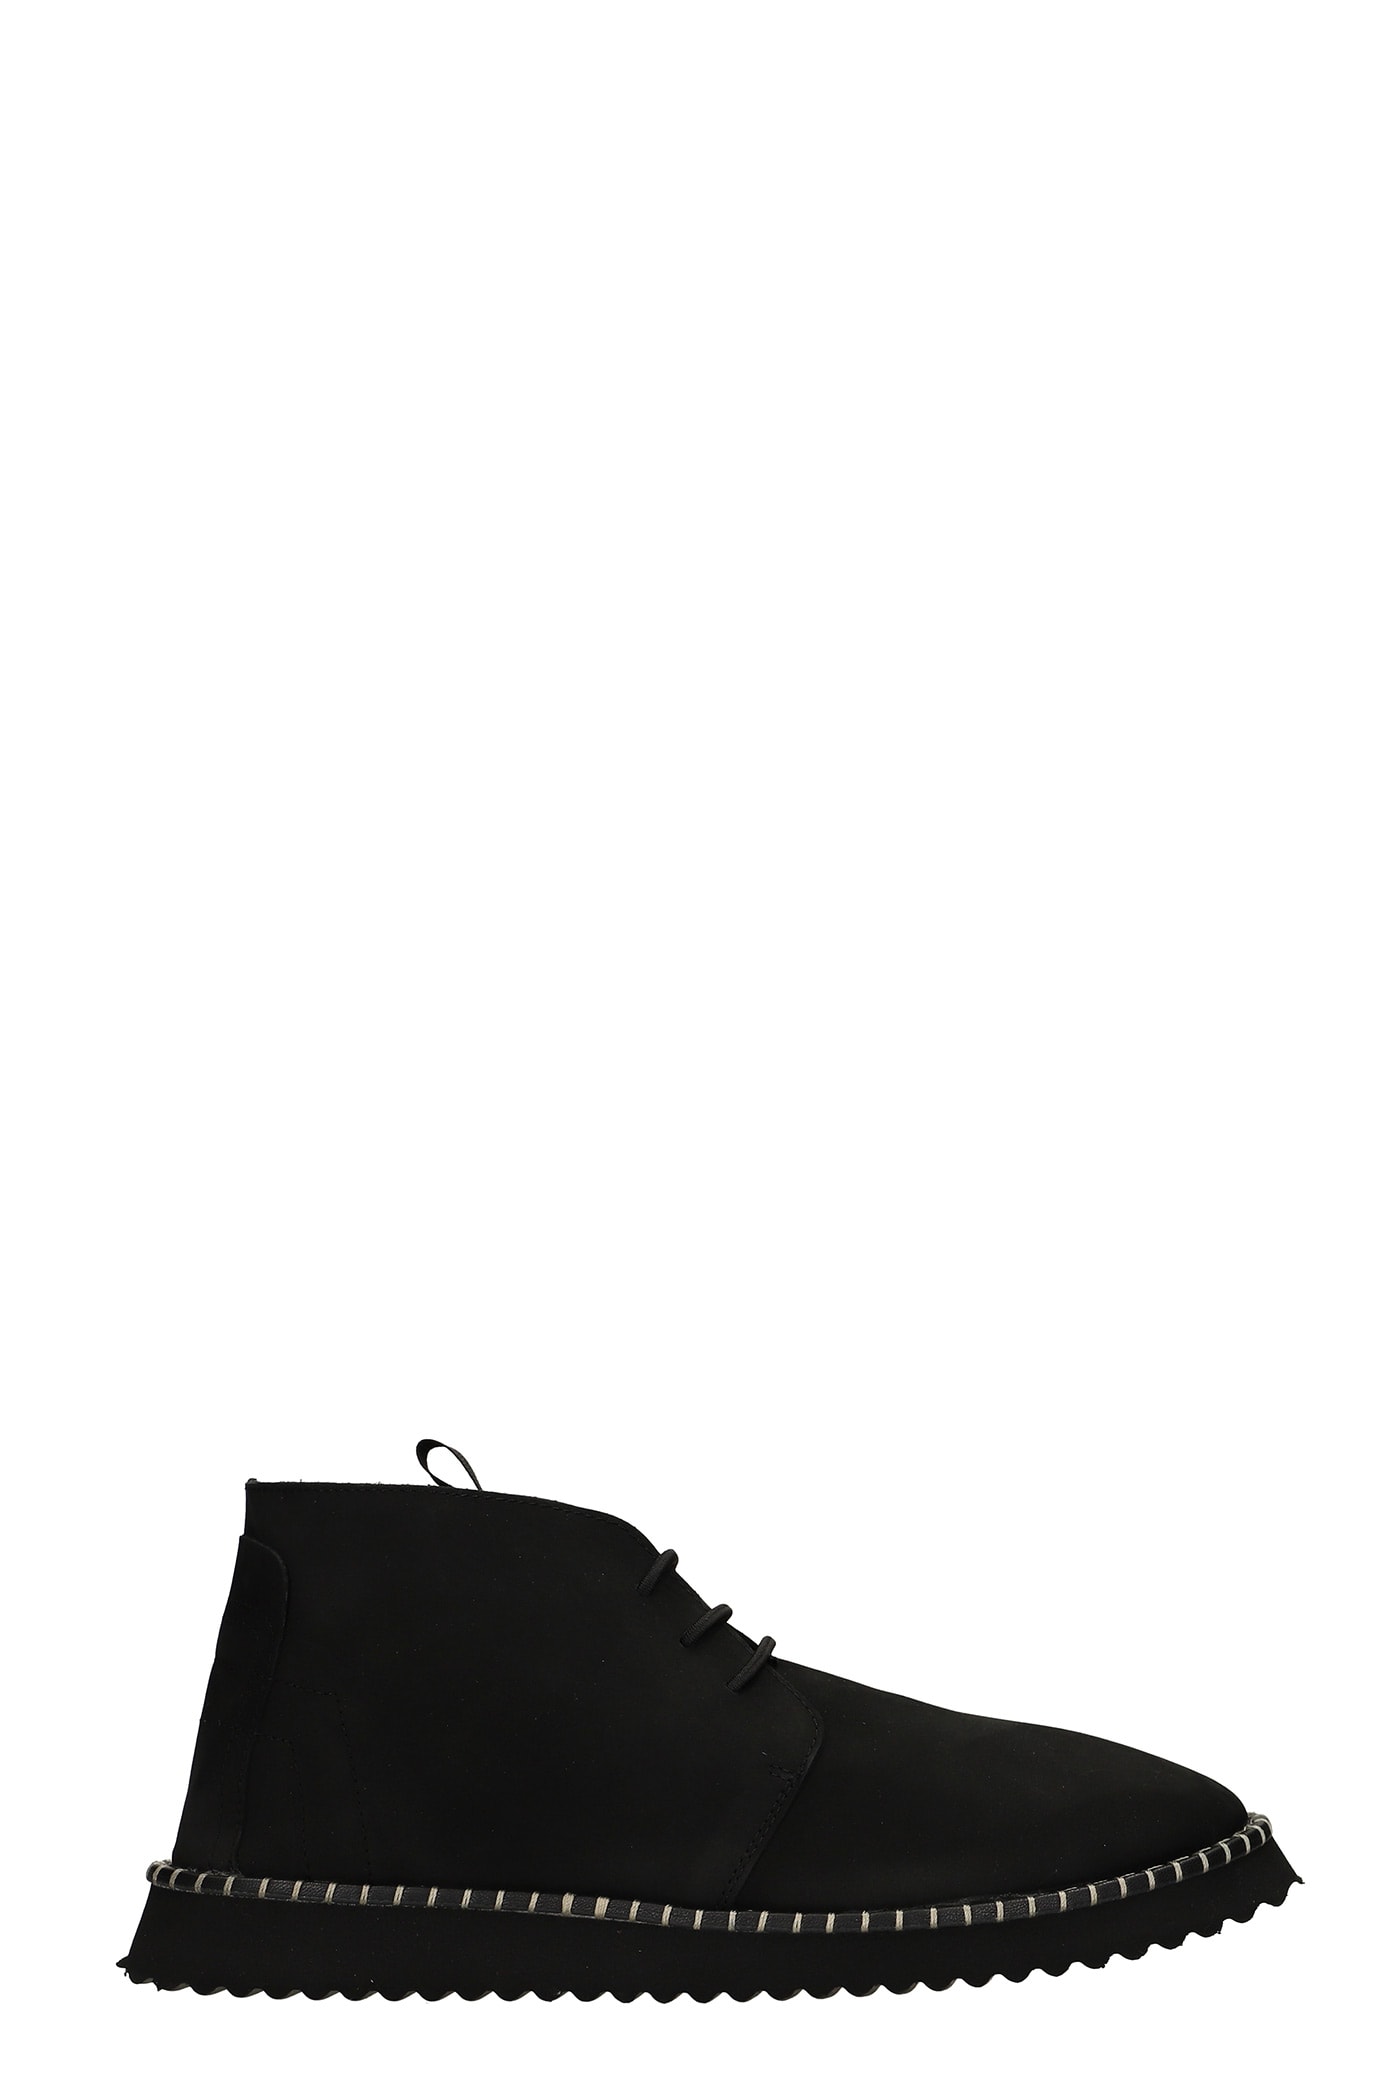 BRUNO BORDESE FLAVOR LACE UP SHOES IN BLACK NUBUCK